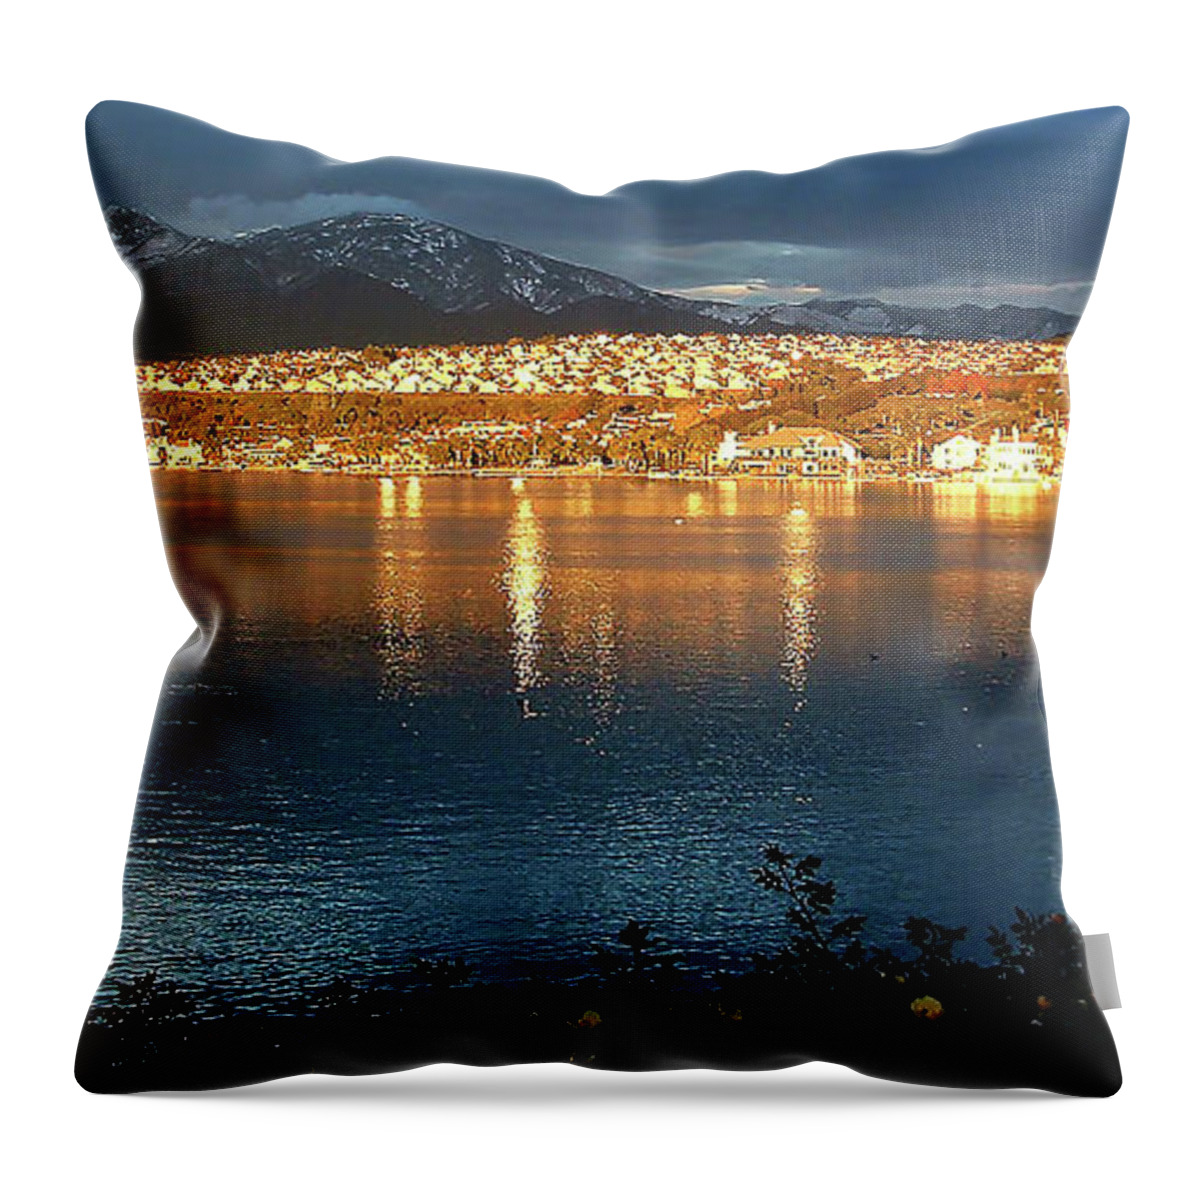 Southern California Throw Pillow featuring the photograph Lake Mission Viejo Winter Sunset by Brian Watt